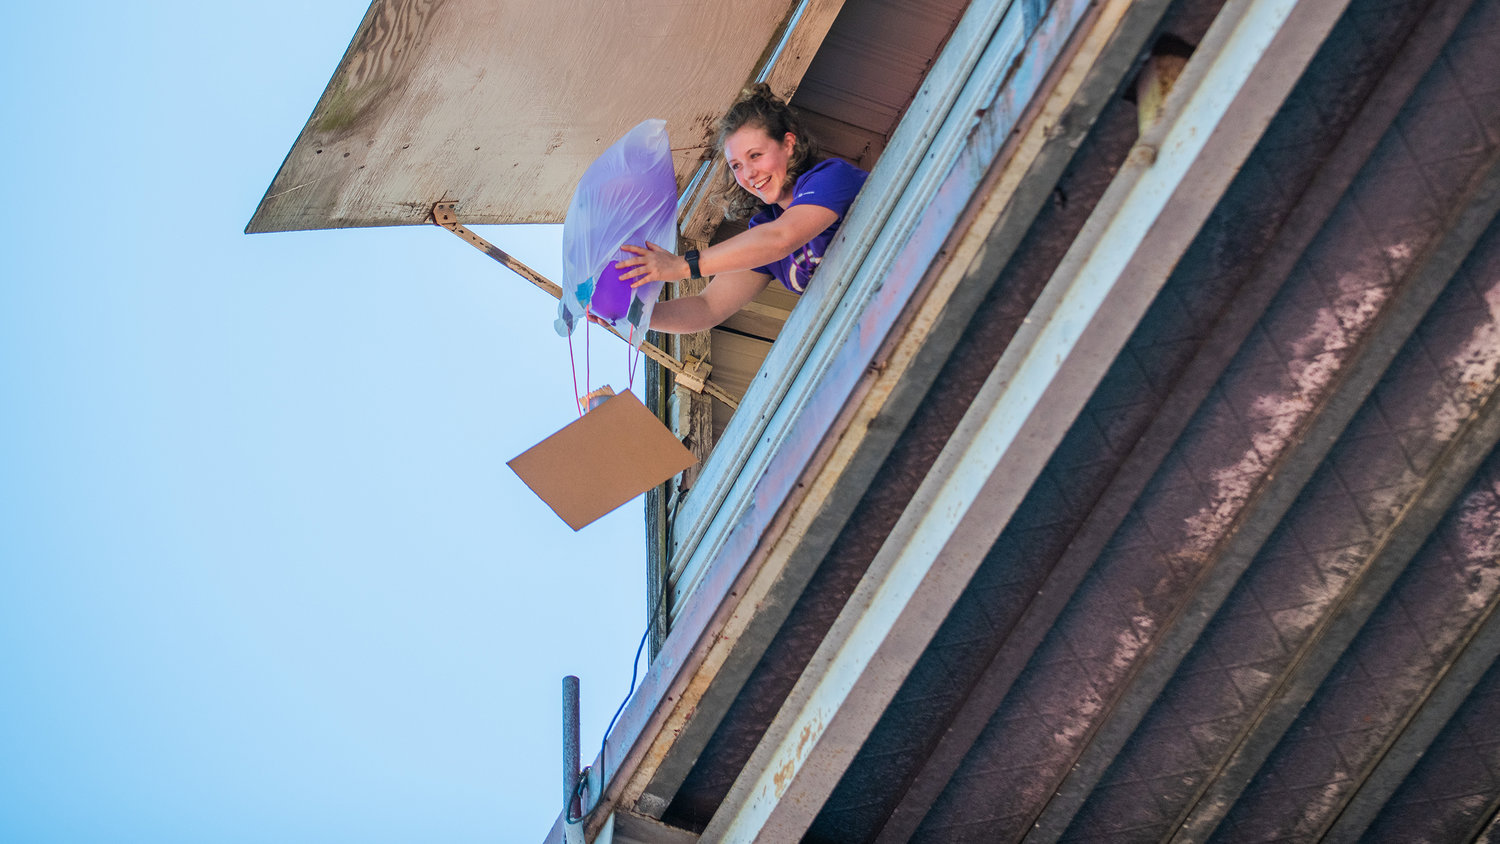 Grace O’Connor, a University of Washington staff member, smiles while dropping STEM student projects from the press box above Bearcat Stadium Tuesday in Chehalis.